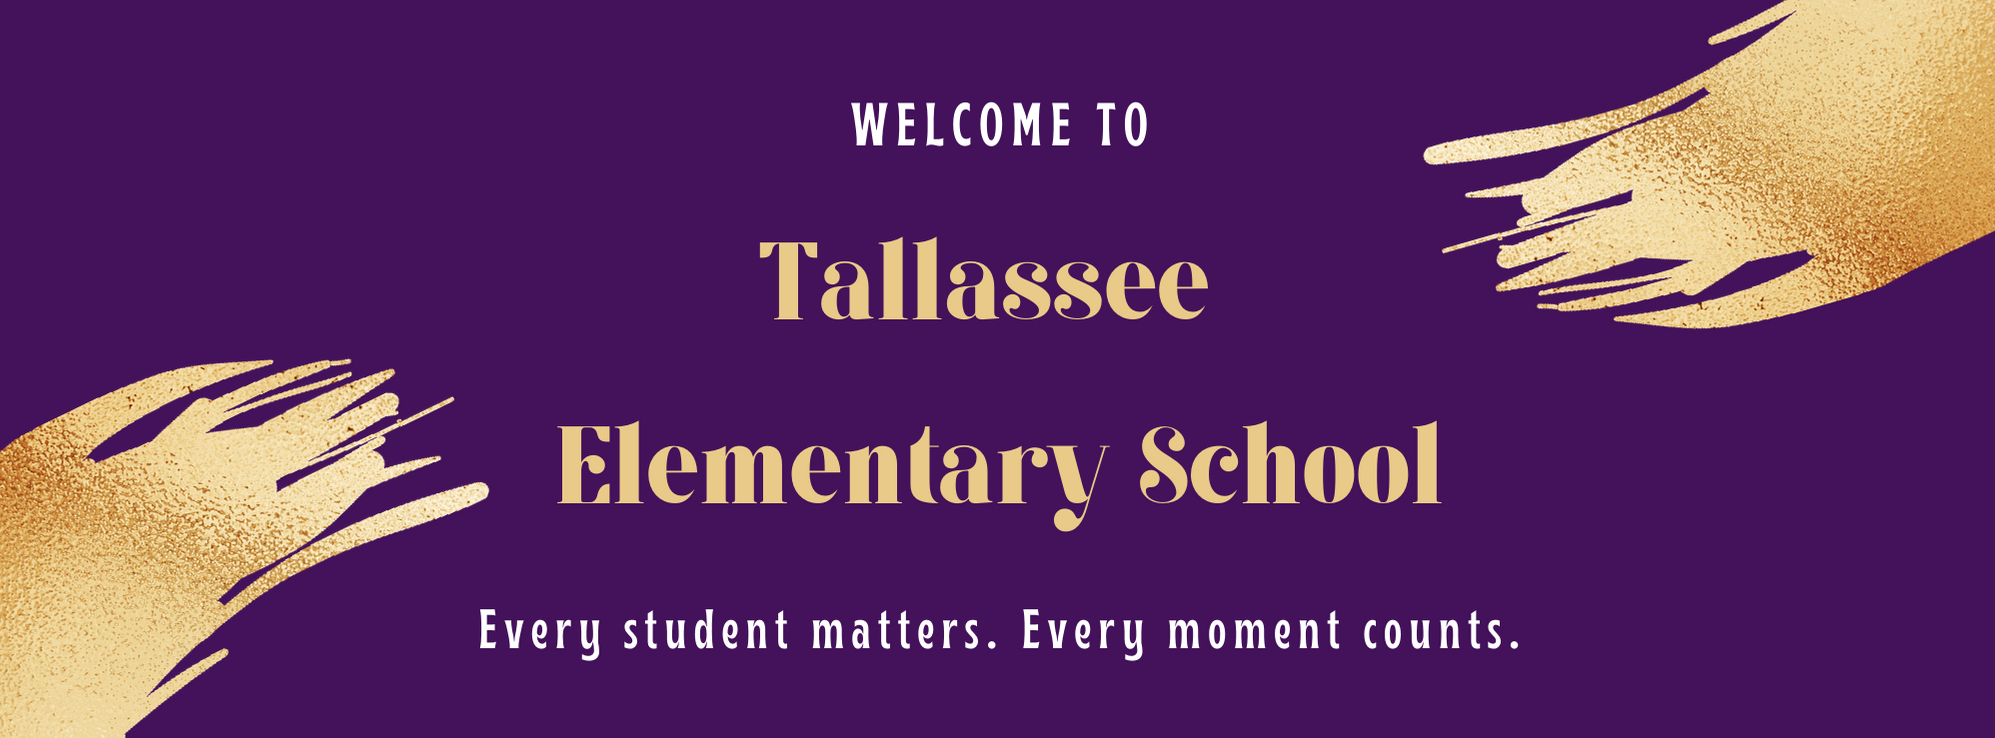 Welcome to Tallassee Elementary School! Every student matters. Every moment counts.